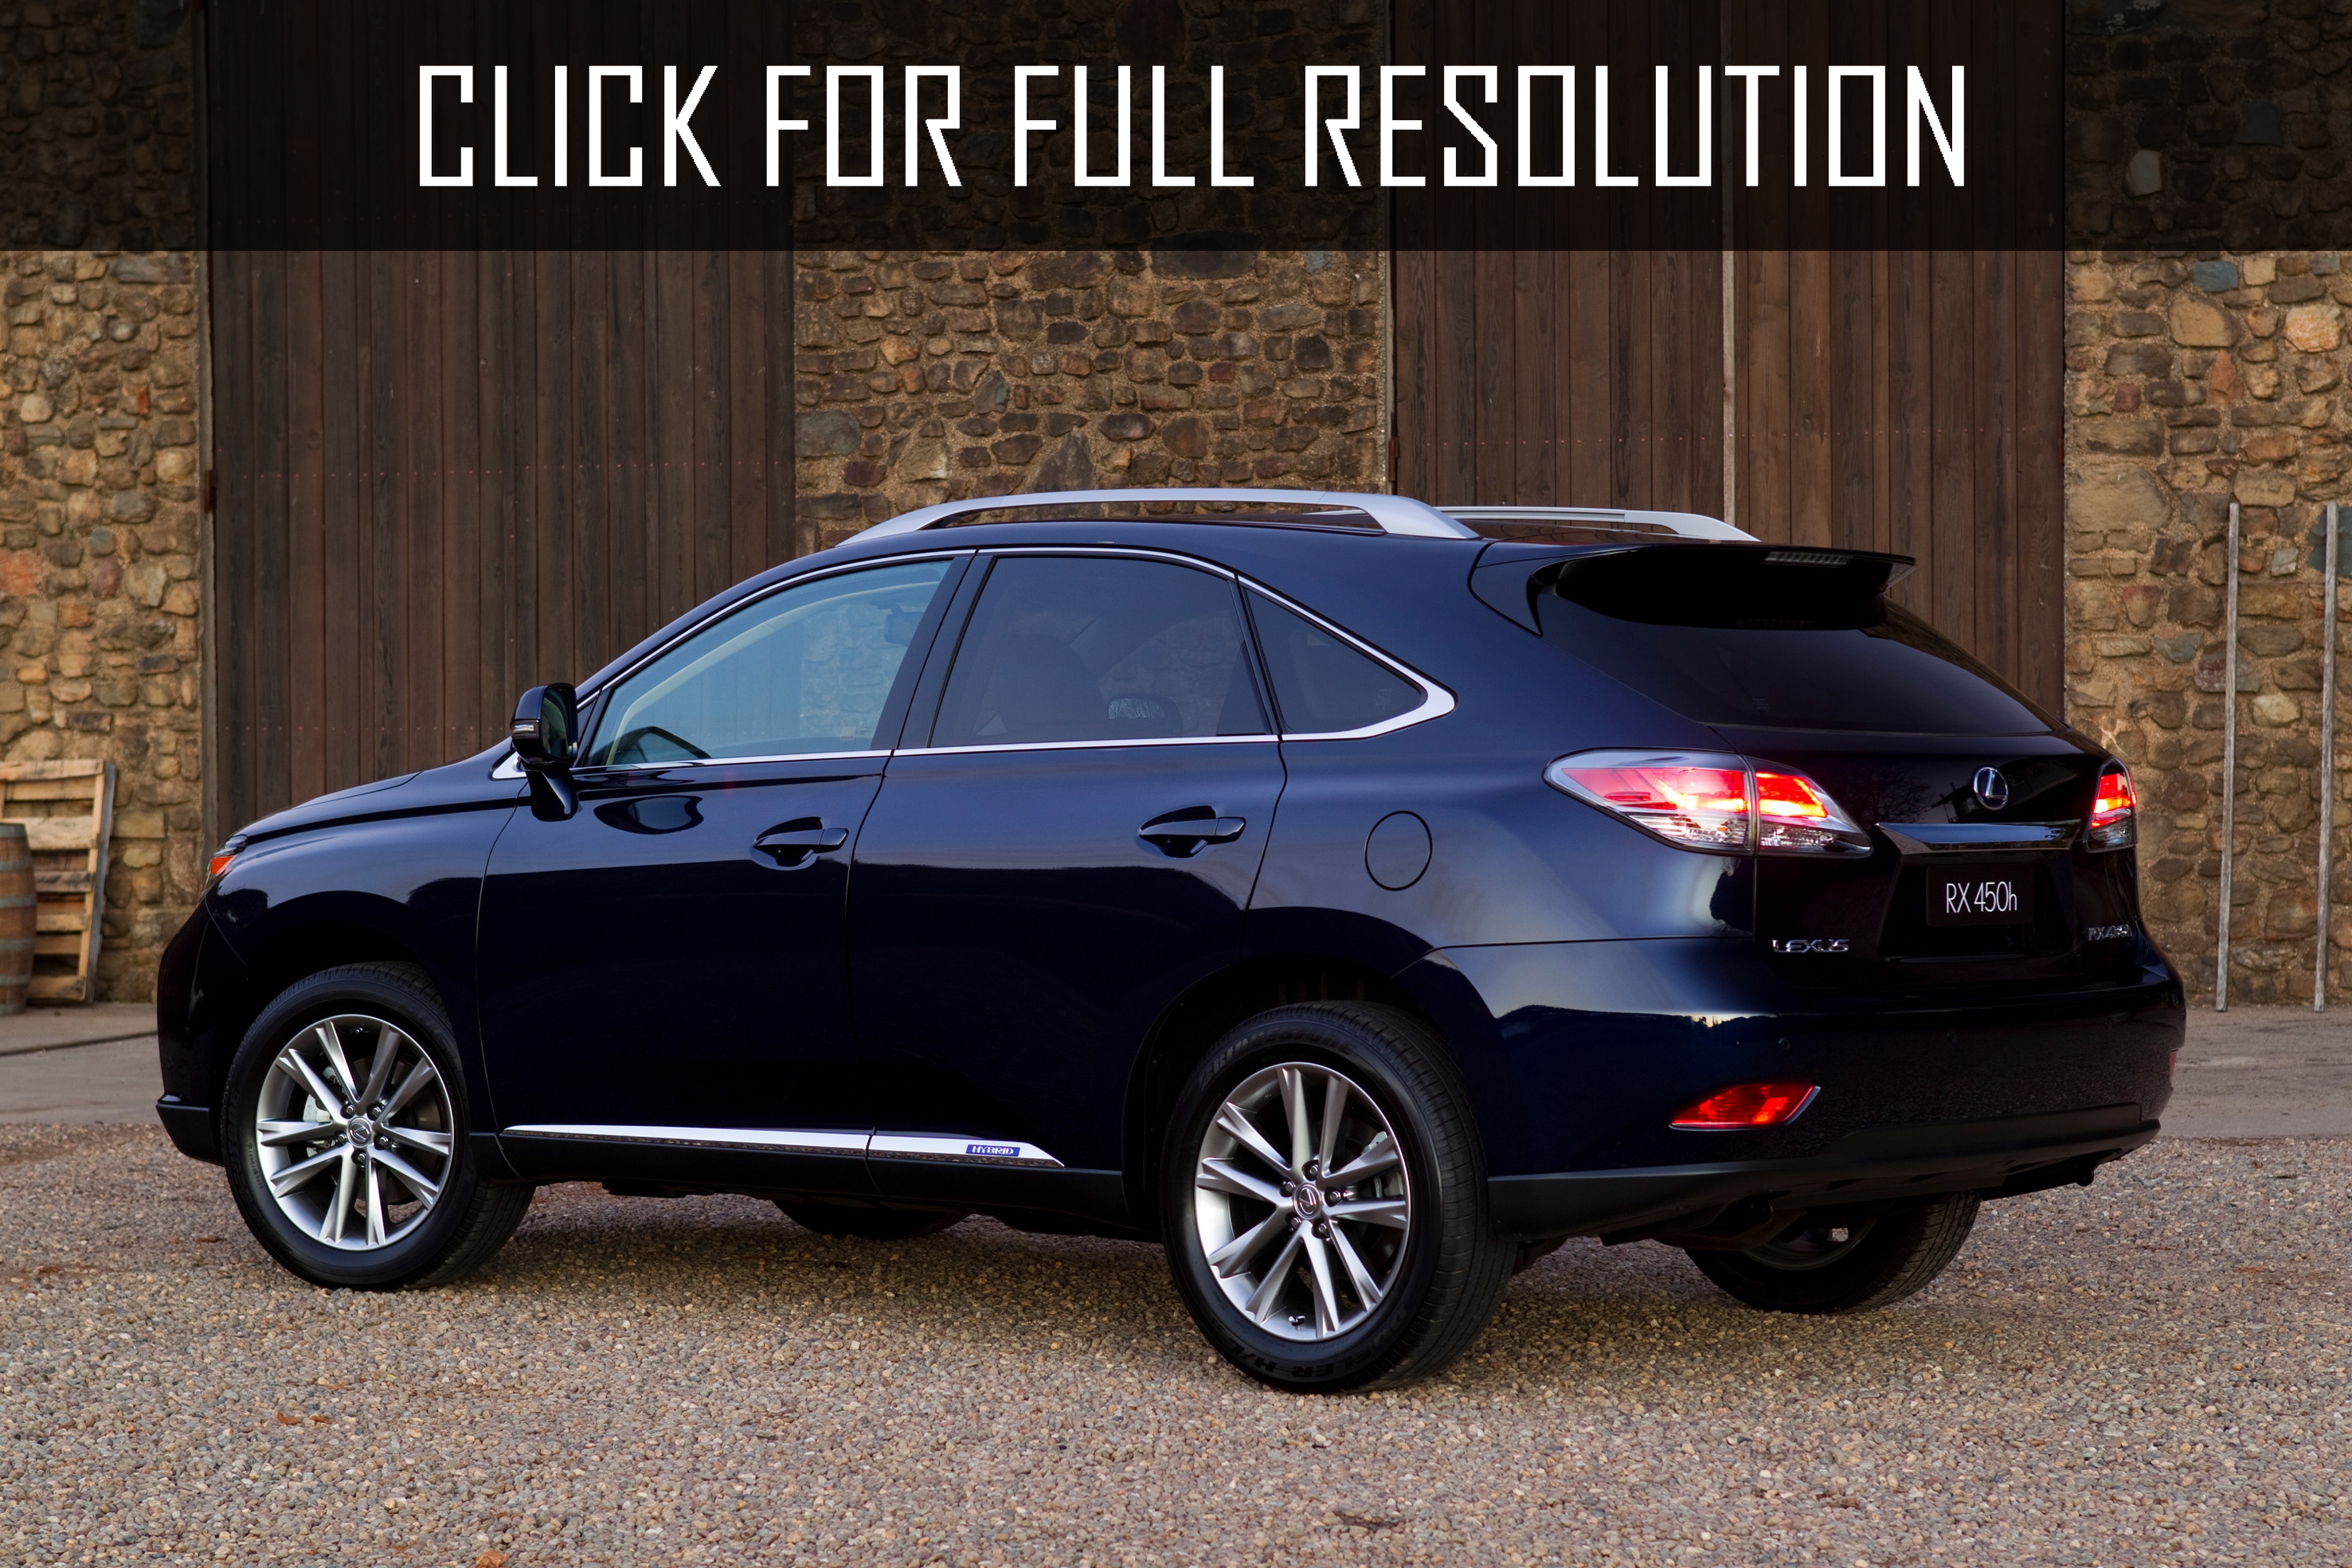 12 Lexus Rx 450h Best Image Gallery 2 15 Share And Download